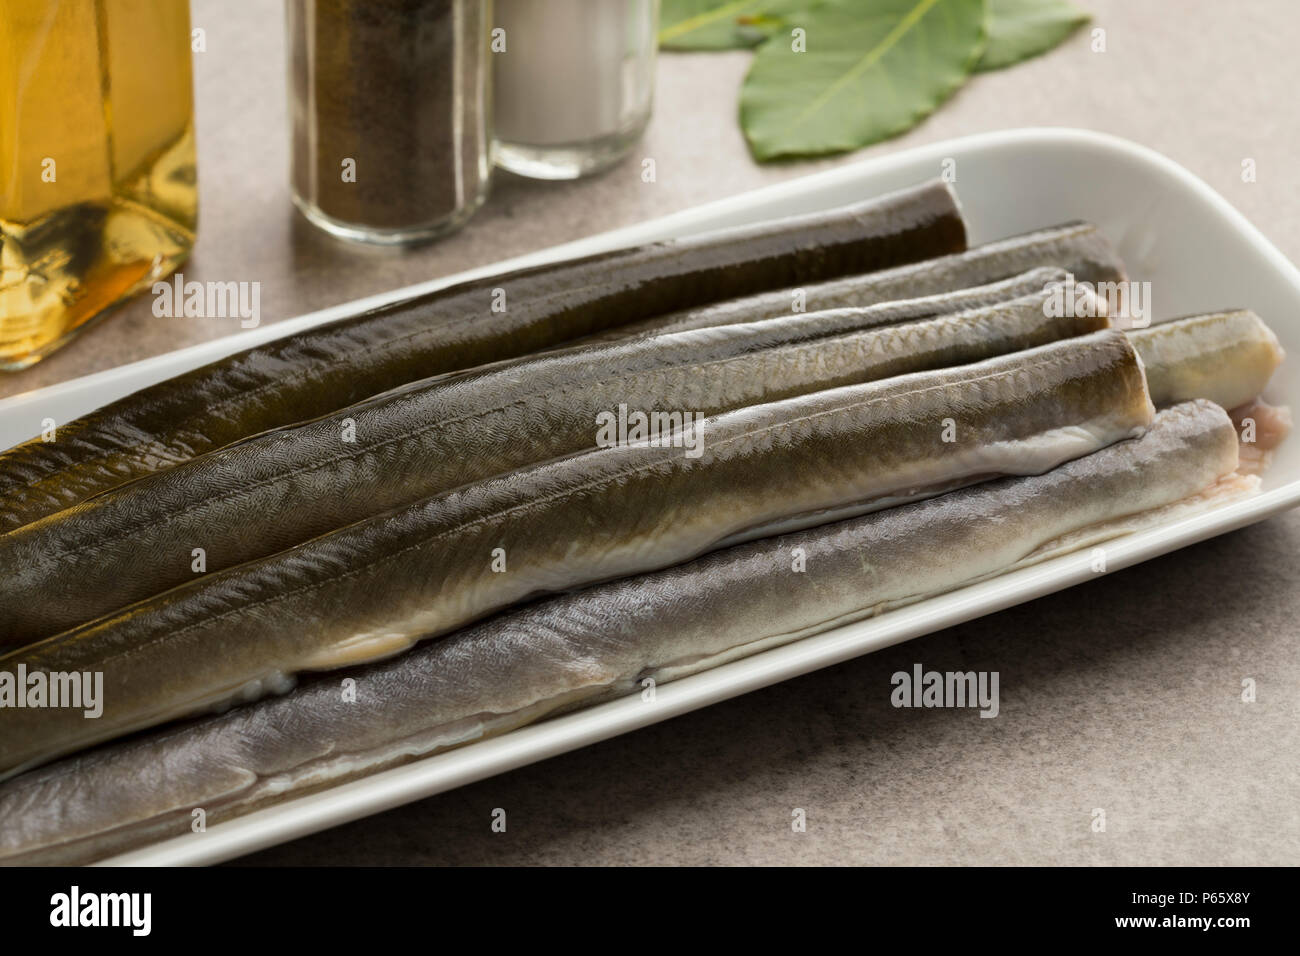 Fresh cleaned raw eels on a dish ready to cook Stock Photo